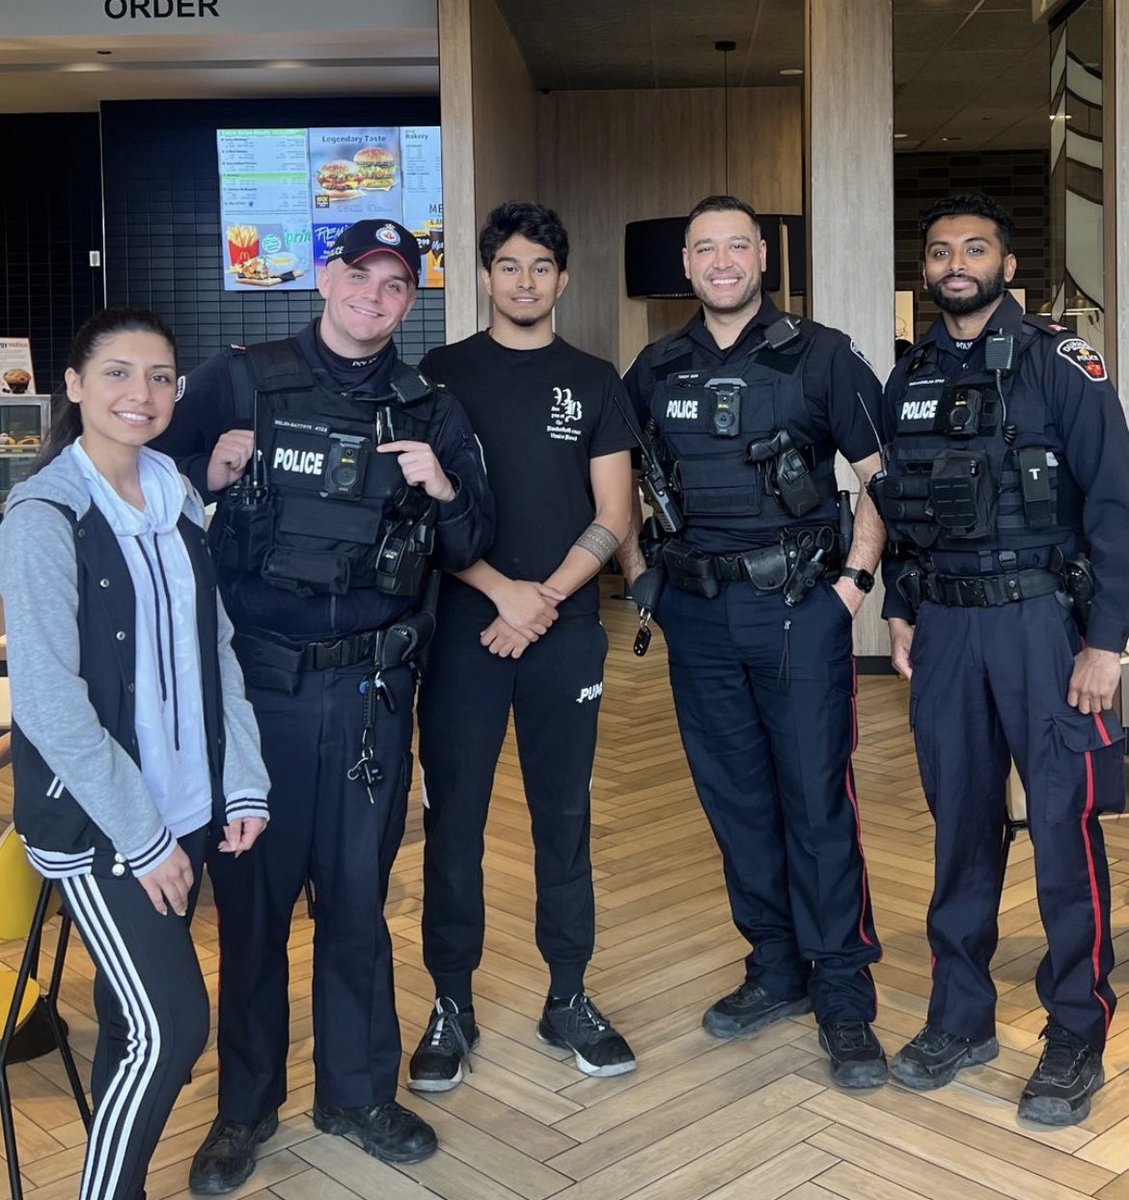 From our team here at @DRPSWestDiv, we would like to thank everyone who came out in #pickering this afternoon. 
A great opportunity to meet the public and showcase positive partnership with #coffeewithacop in  our municipalities.
#drps #cops #police #canada #durham #coffeebreak